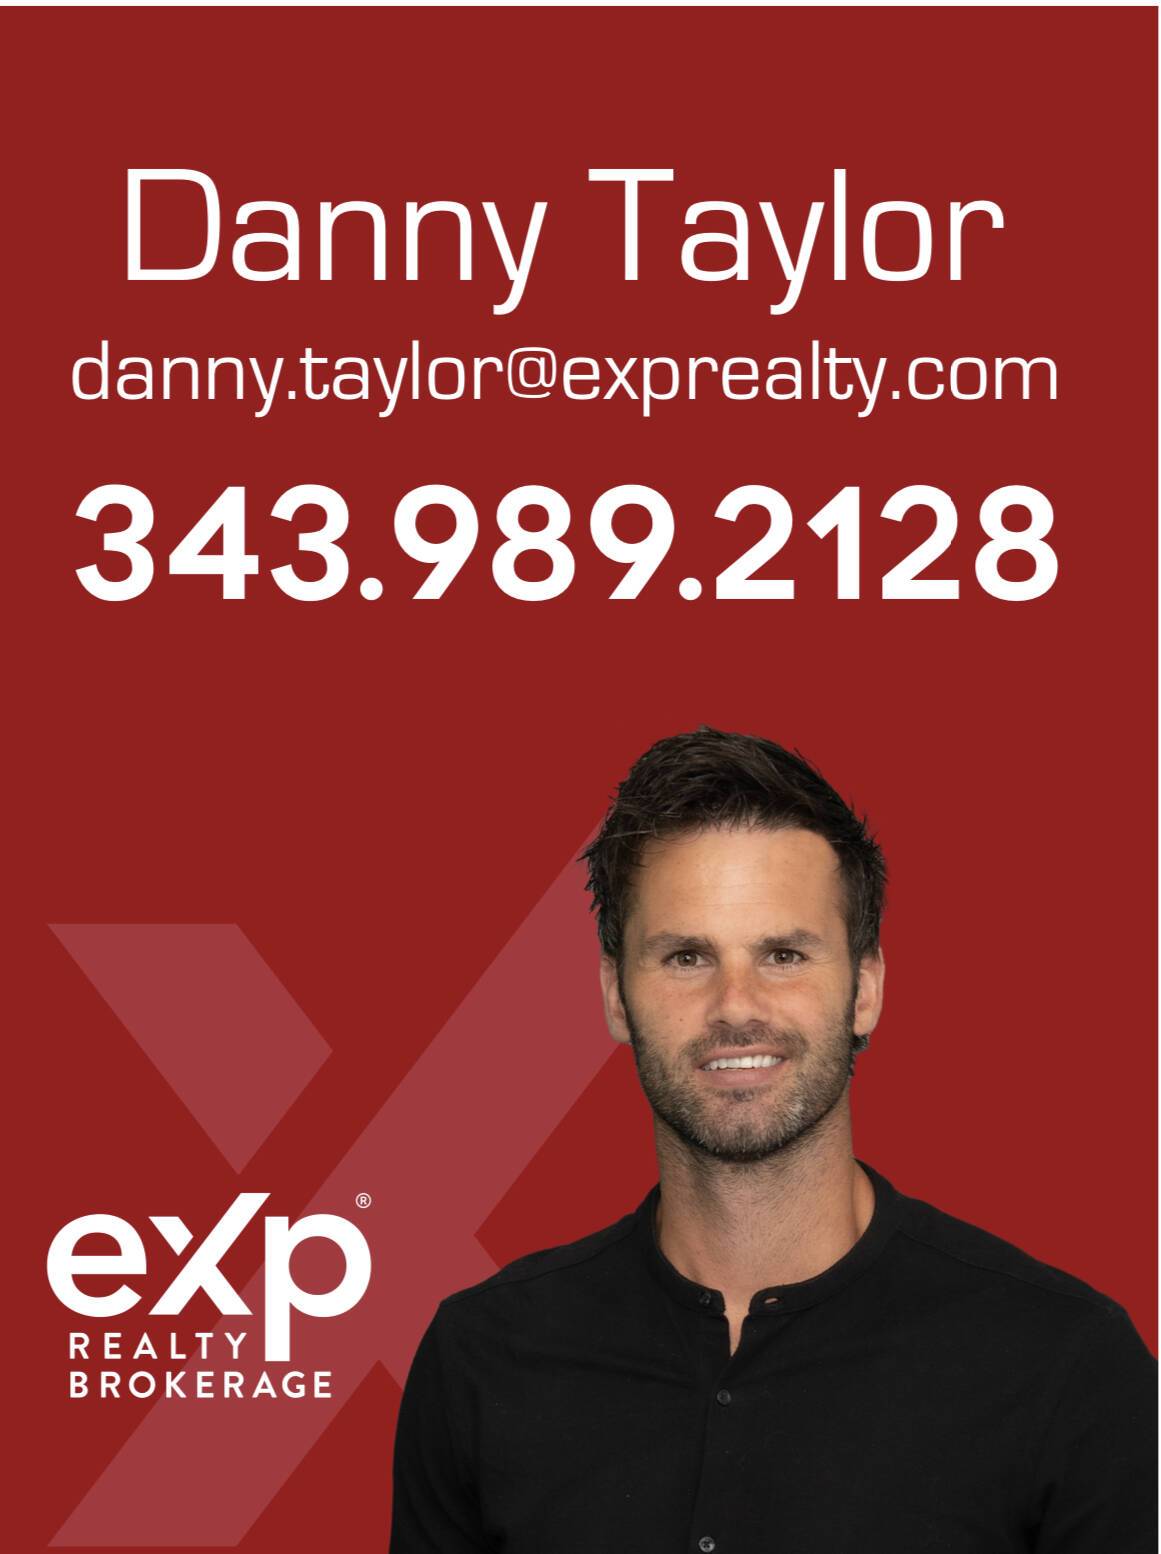 Danny Taylor exp Realty